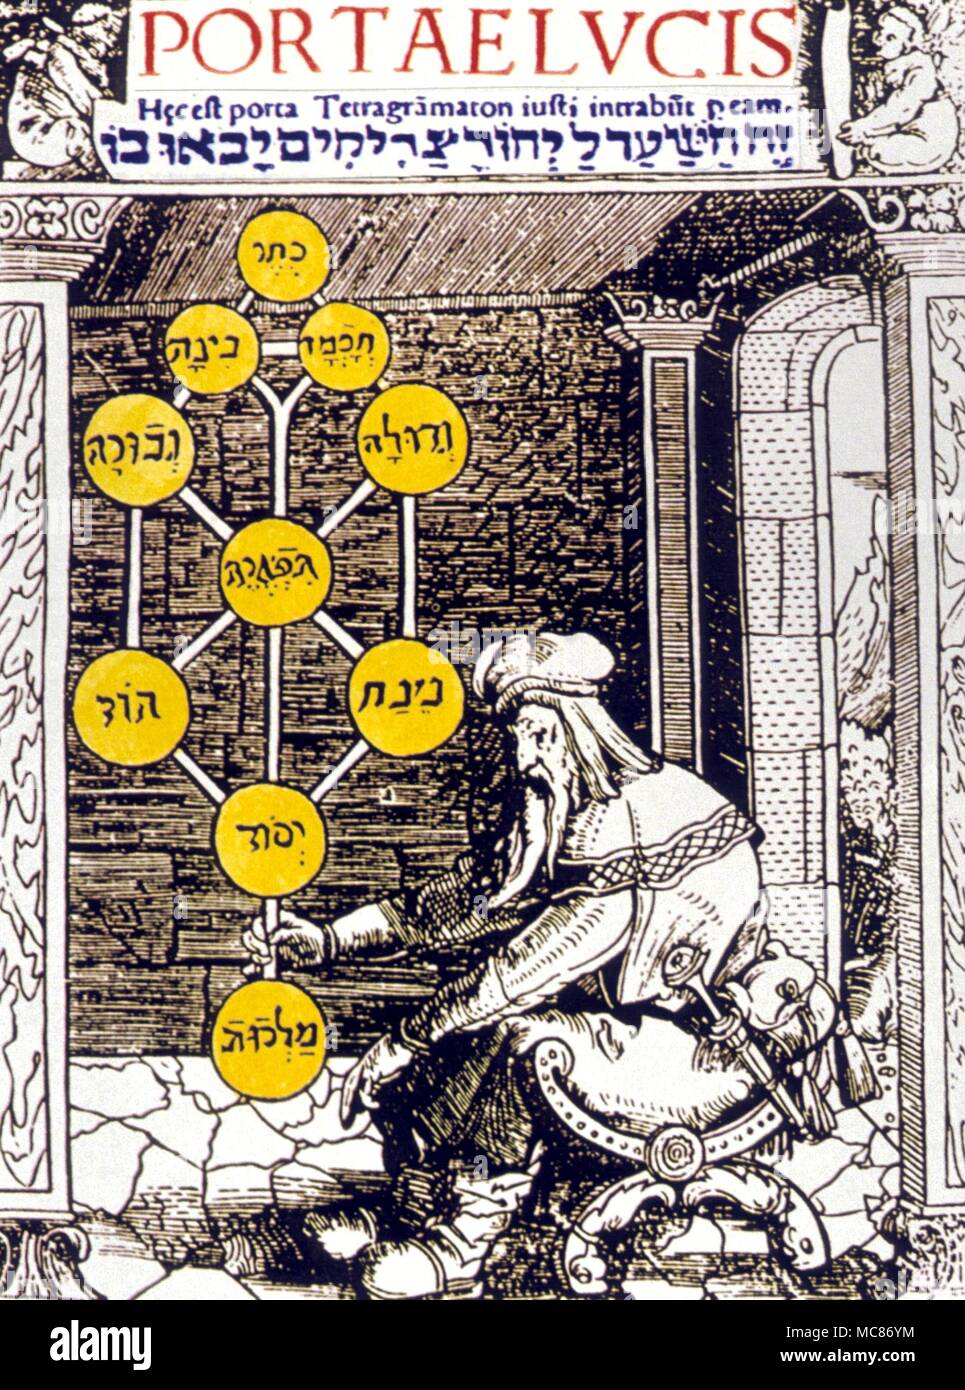 CABBALA The sephirothic tree, held in the hands of an initiated cabbalist, who holds the key to the secret between the Earth and the Moon. From Paul Ricius, Portae Lucis (1516), which is the door offered by the four letters of the Tetragrammaton Stock Photo